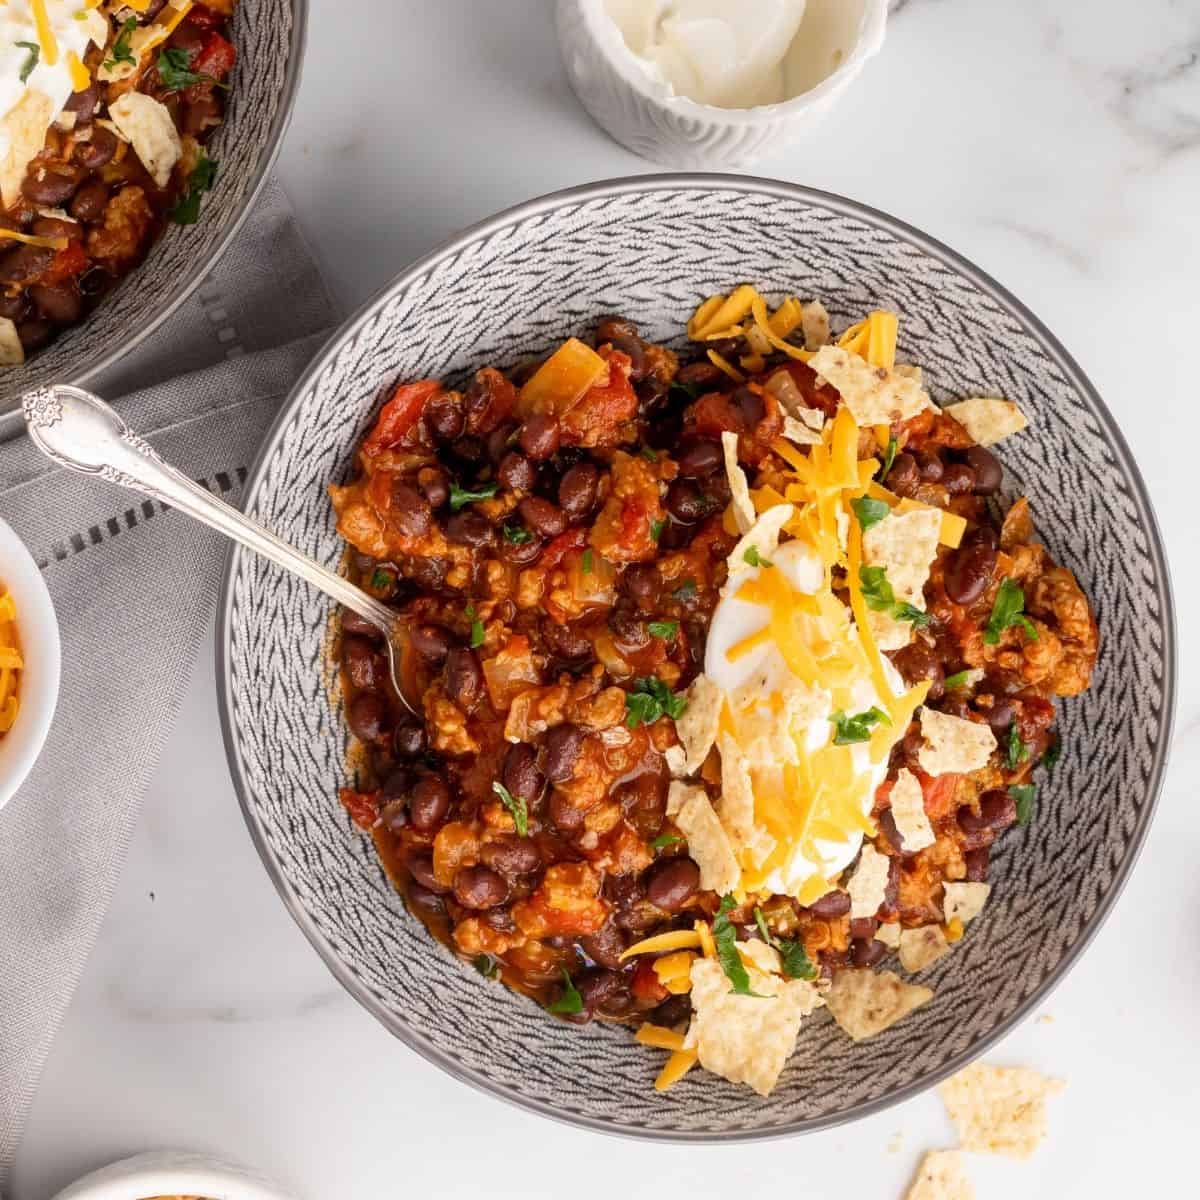 vegetarian chili recipe in a bowl with sour cream and tortilla chips